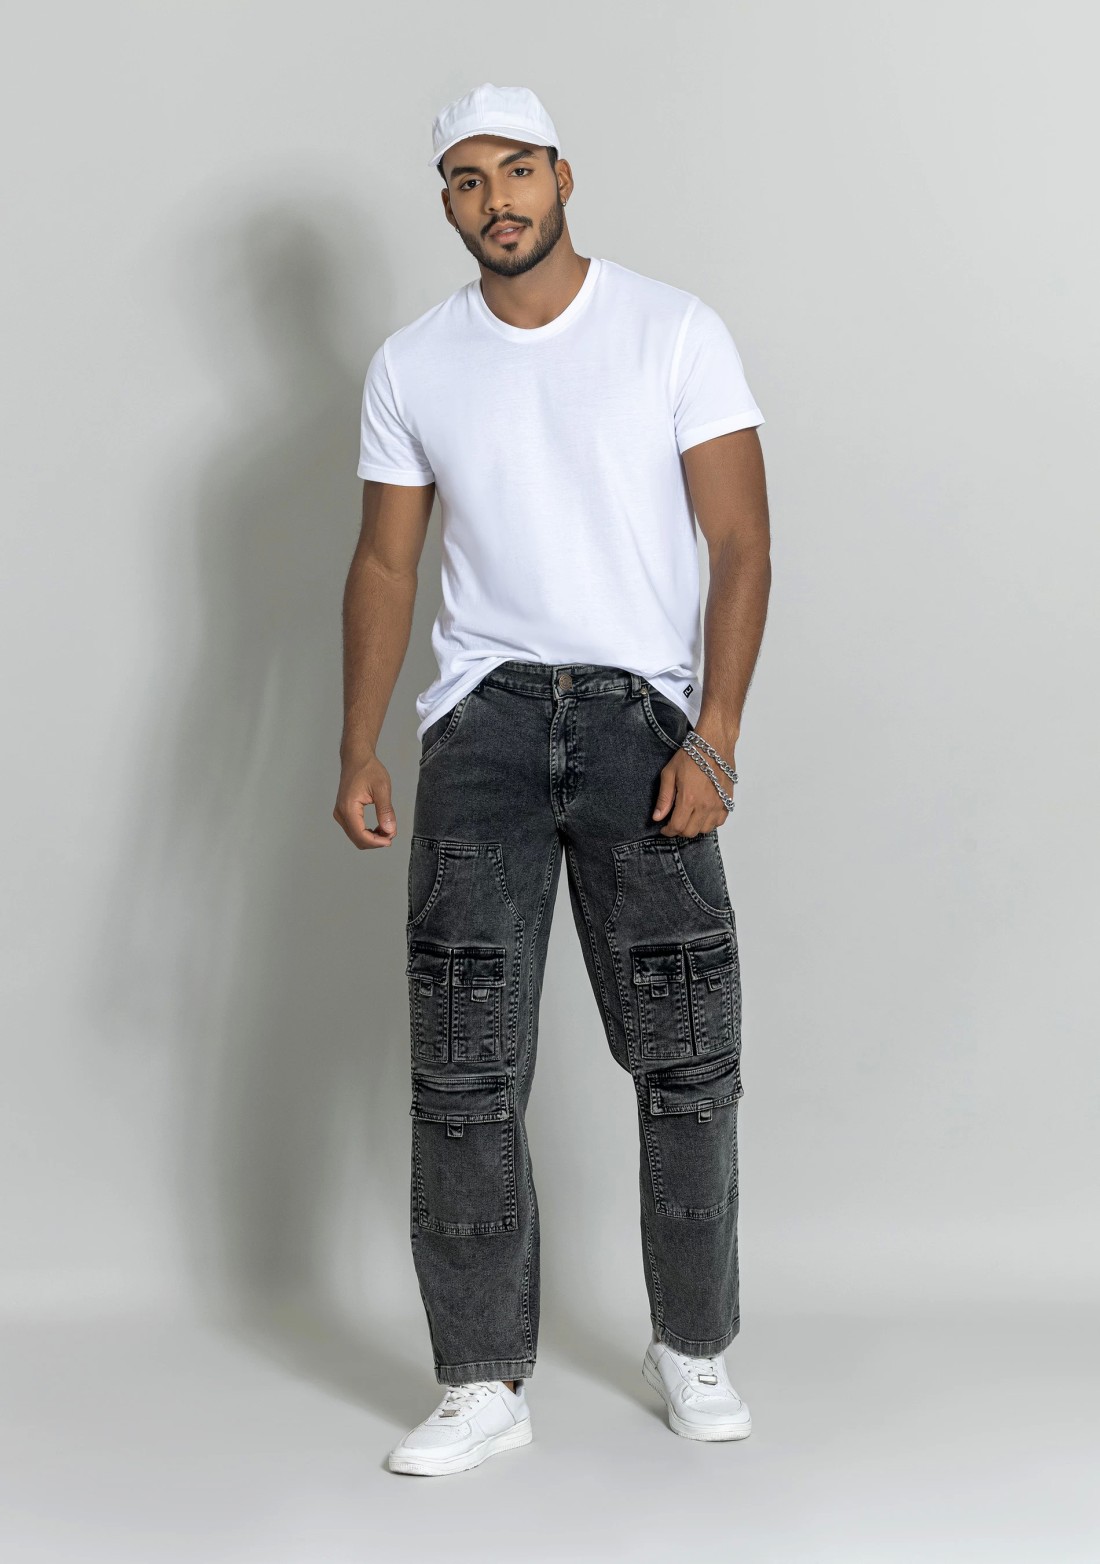 Black Straight Fit Cut and Sew Men's Fashion Jeans